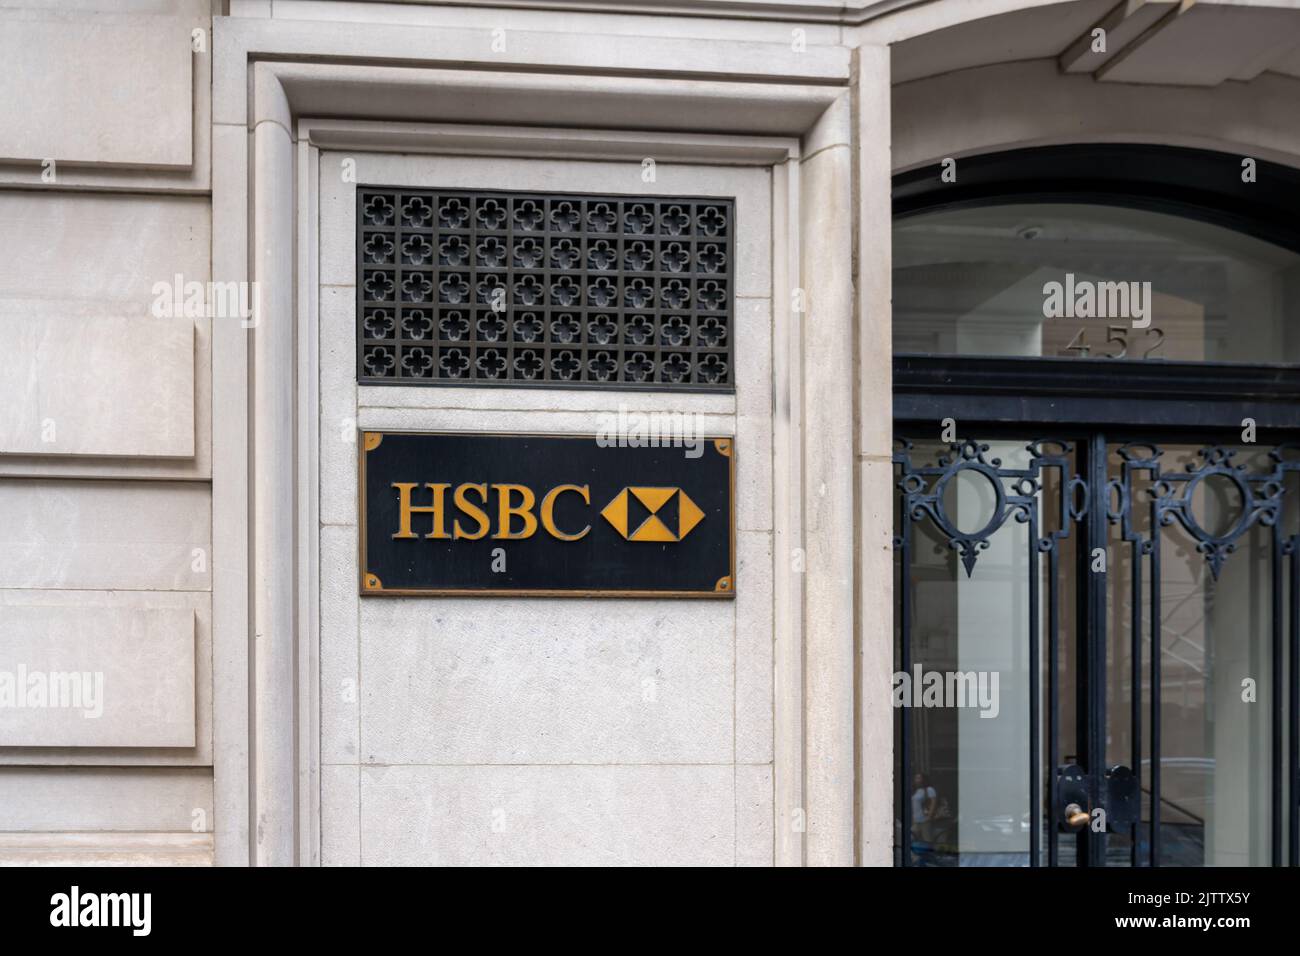 New York City, USA - August 17, 2022: The entrance to HSBC Bank branch at 452 Fifth Ave in New York City, USA. Stock Photo